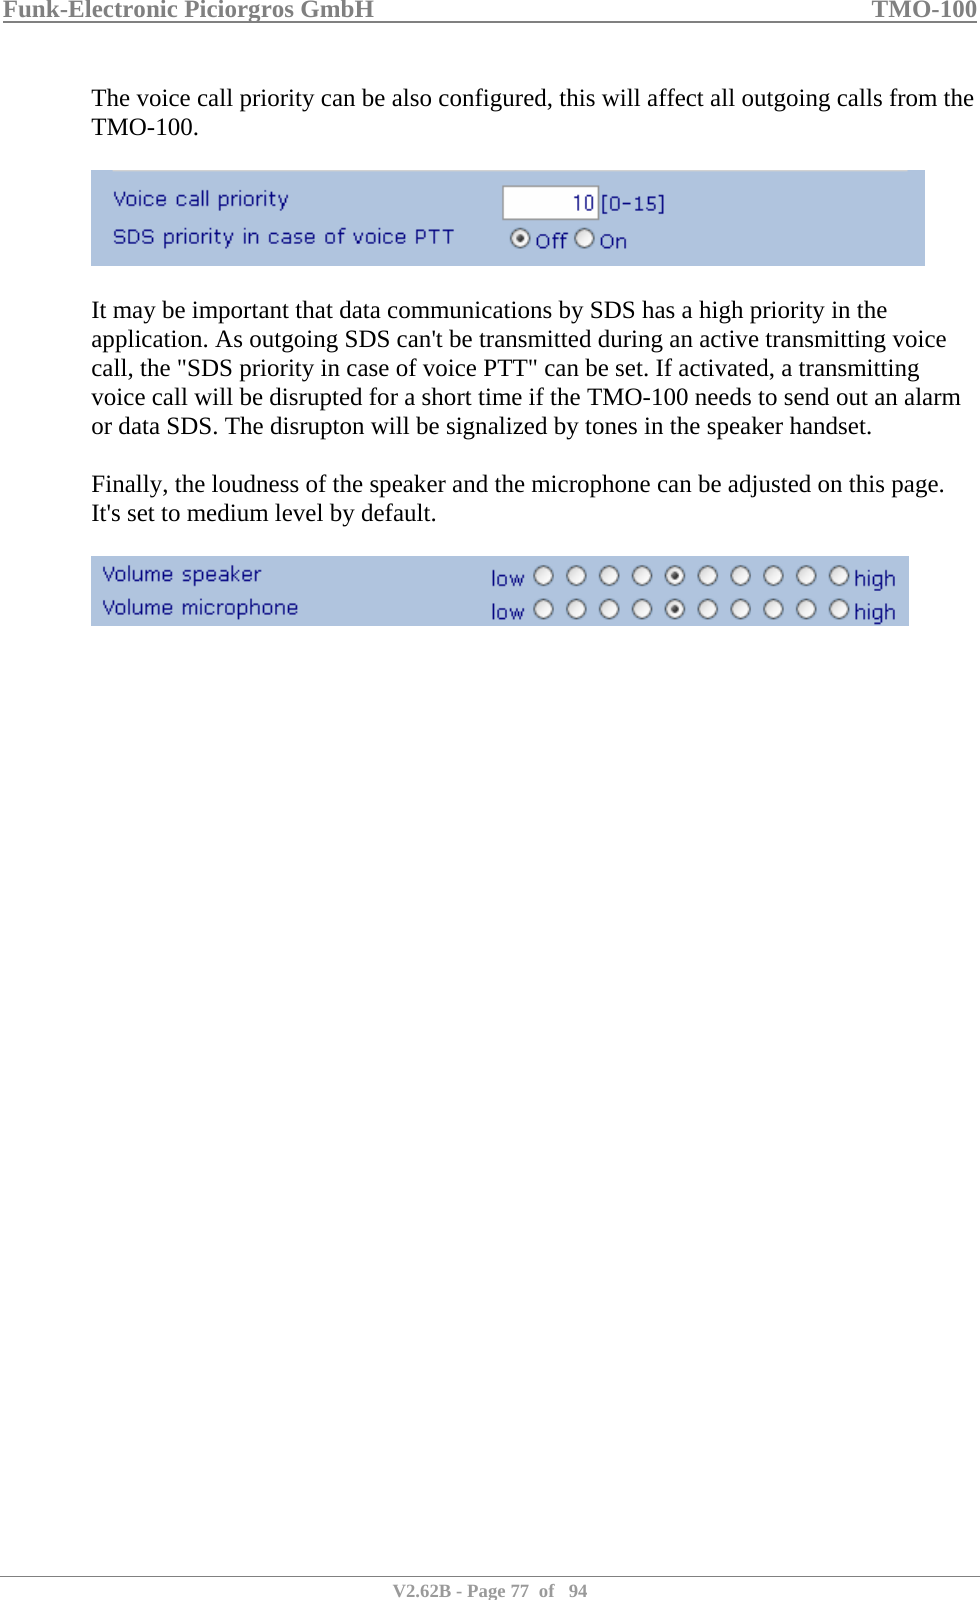 Funk-Electronic Piciorgros GmbH   TMO-100   V2.62B - Page 77  of   94   The voice call priority can be also configured, this will affect all outgoing calls from the TMO-100.    It may be important that data communications by SDS has a high priority in the application. As outgoing SDS can&apos;t be transmitted during an active transmitting voice call, the &quot;SDS priority in case of voice PTT&quot; can be set. If activated, a transmitting voice call will be disrupted for a short time if the TMO-100 needs to send out an alarm or data SDS. The disrupton will be signalized by tones in the speaker handset.  Finally, the loudness of the speaker and the microphone can be adjusted on this page. It&apos;s set to medium level by default.    